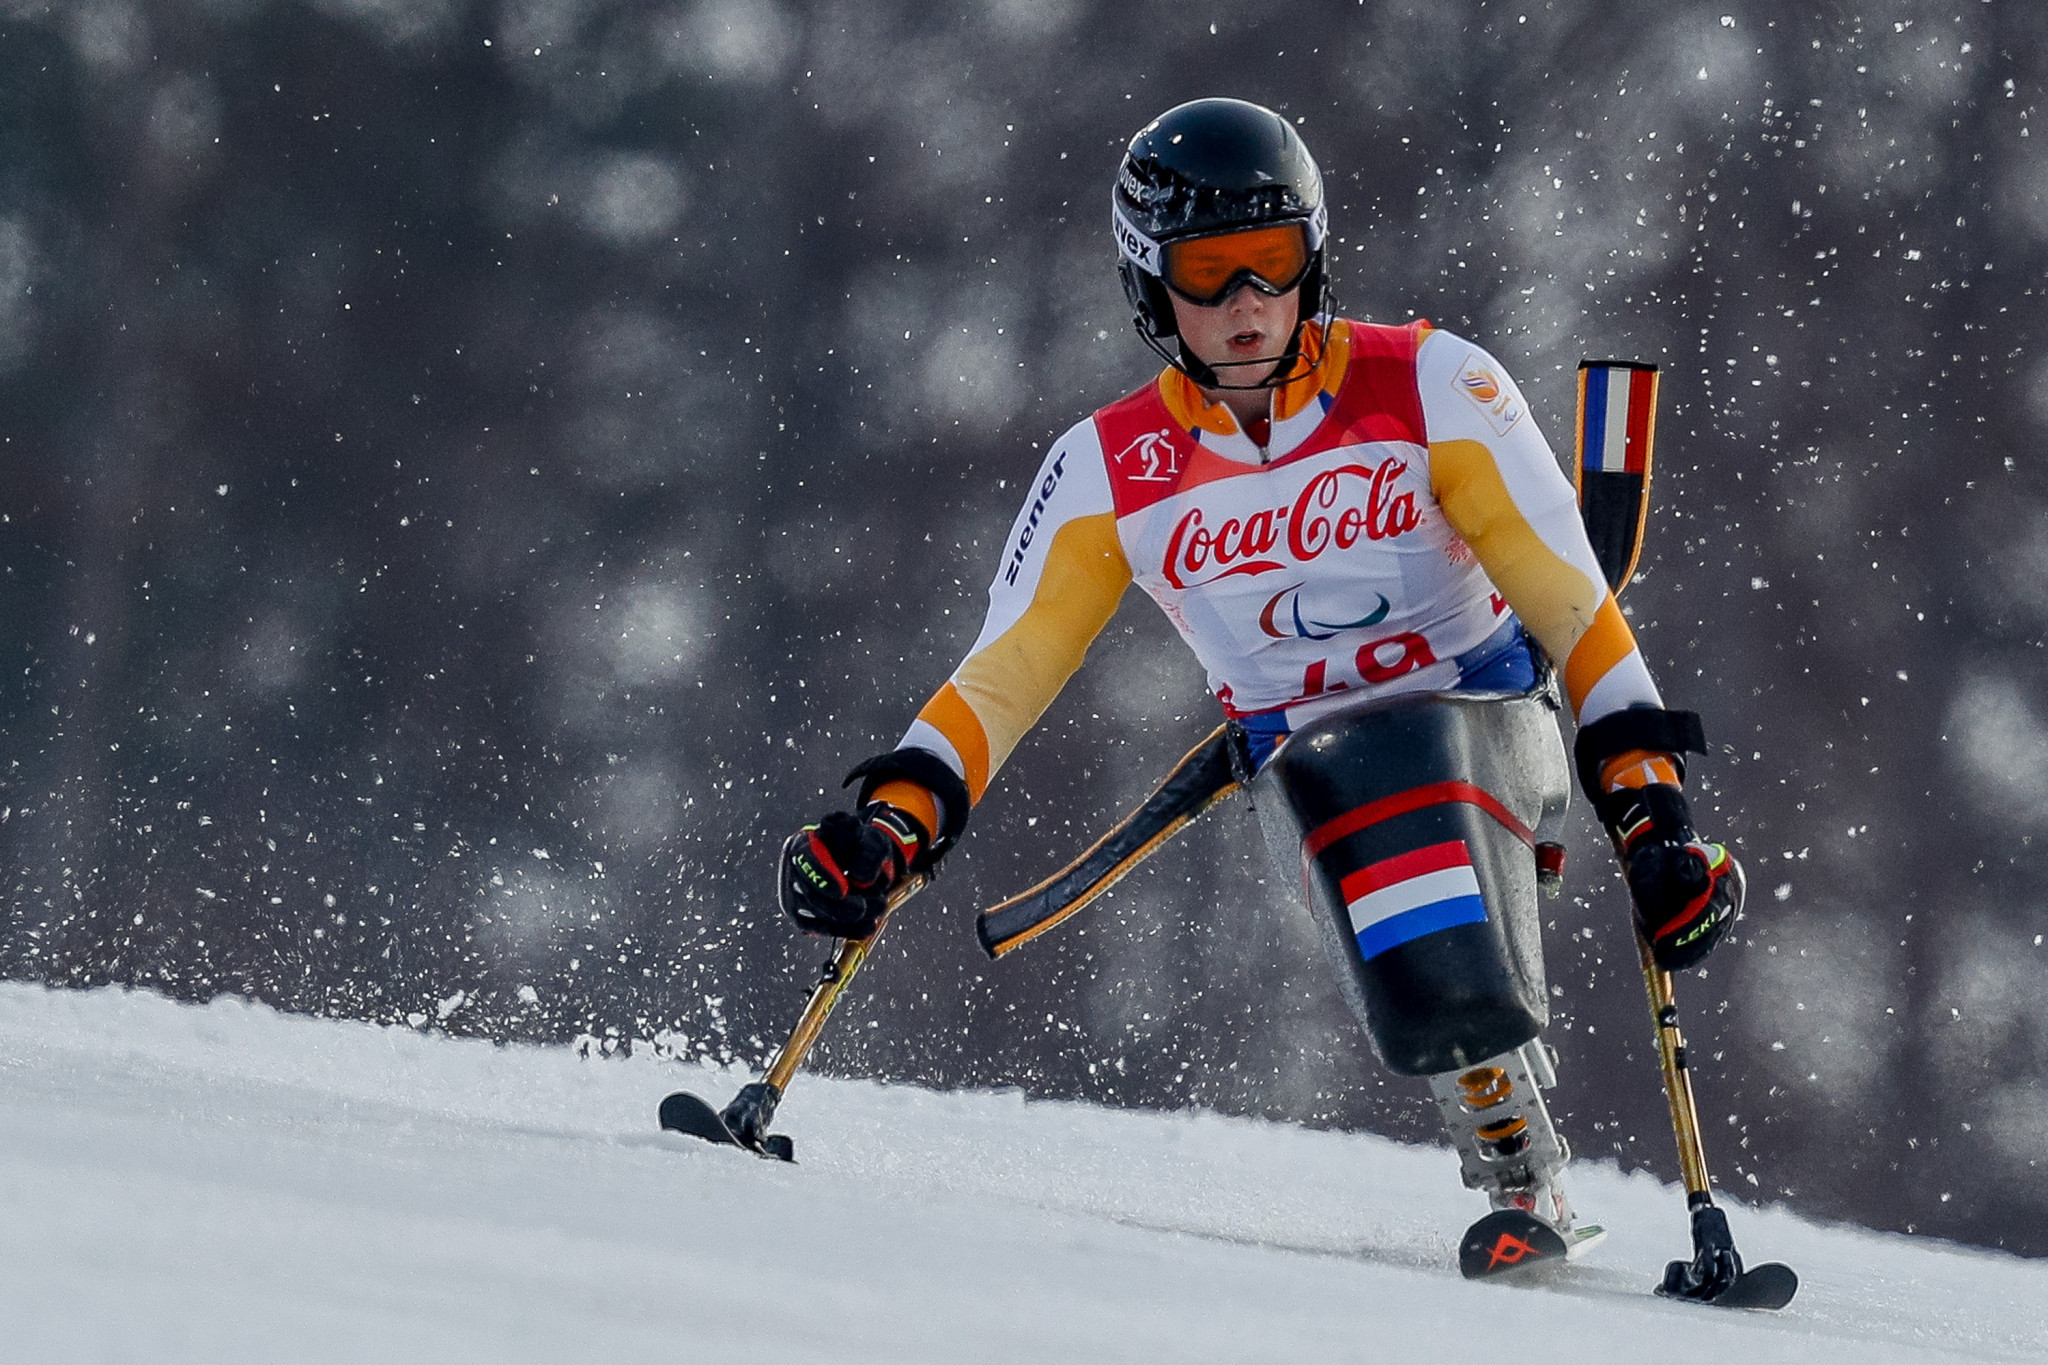 Jeroen Kampschreur of The Netherlands was among the double winners at the World Para Alpine Skiing World Cup ©World Para Snow Sports